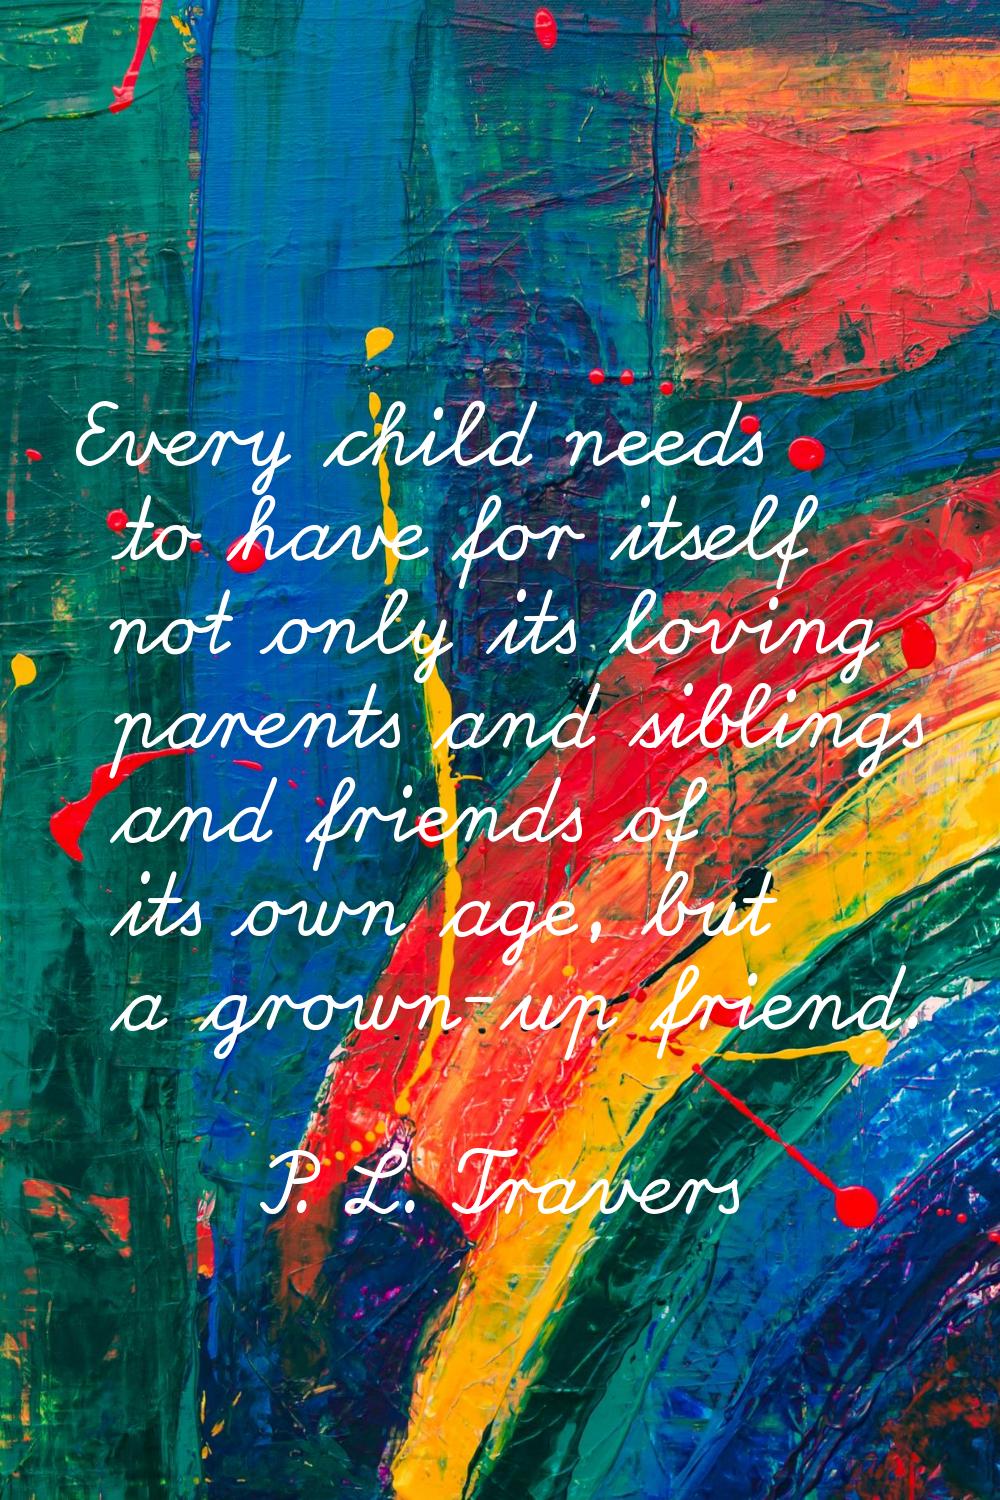 Every child needs to have for itself not only its loving parents and siblings and friends of its ow